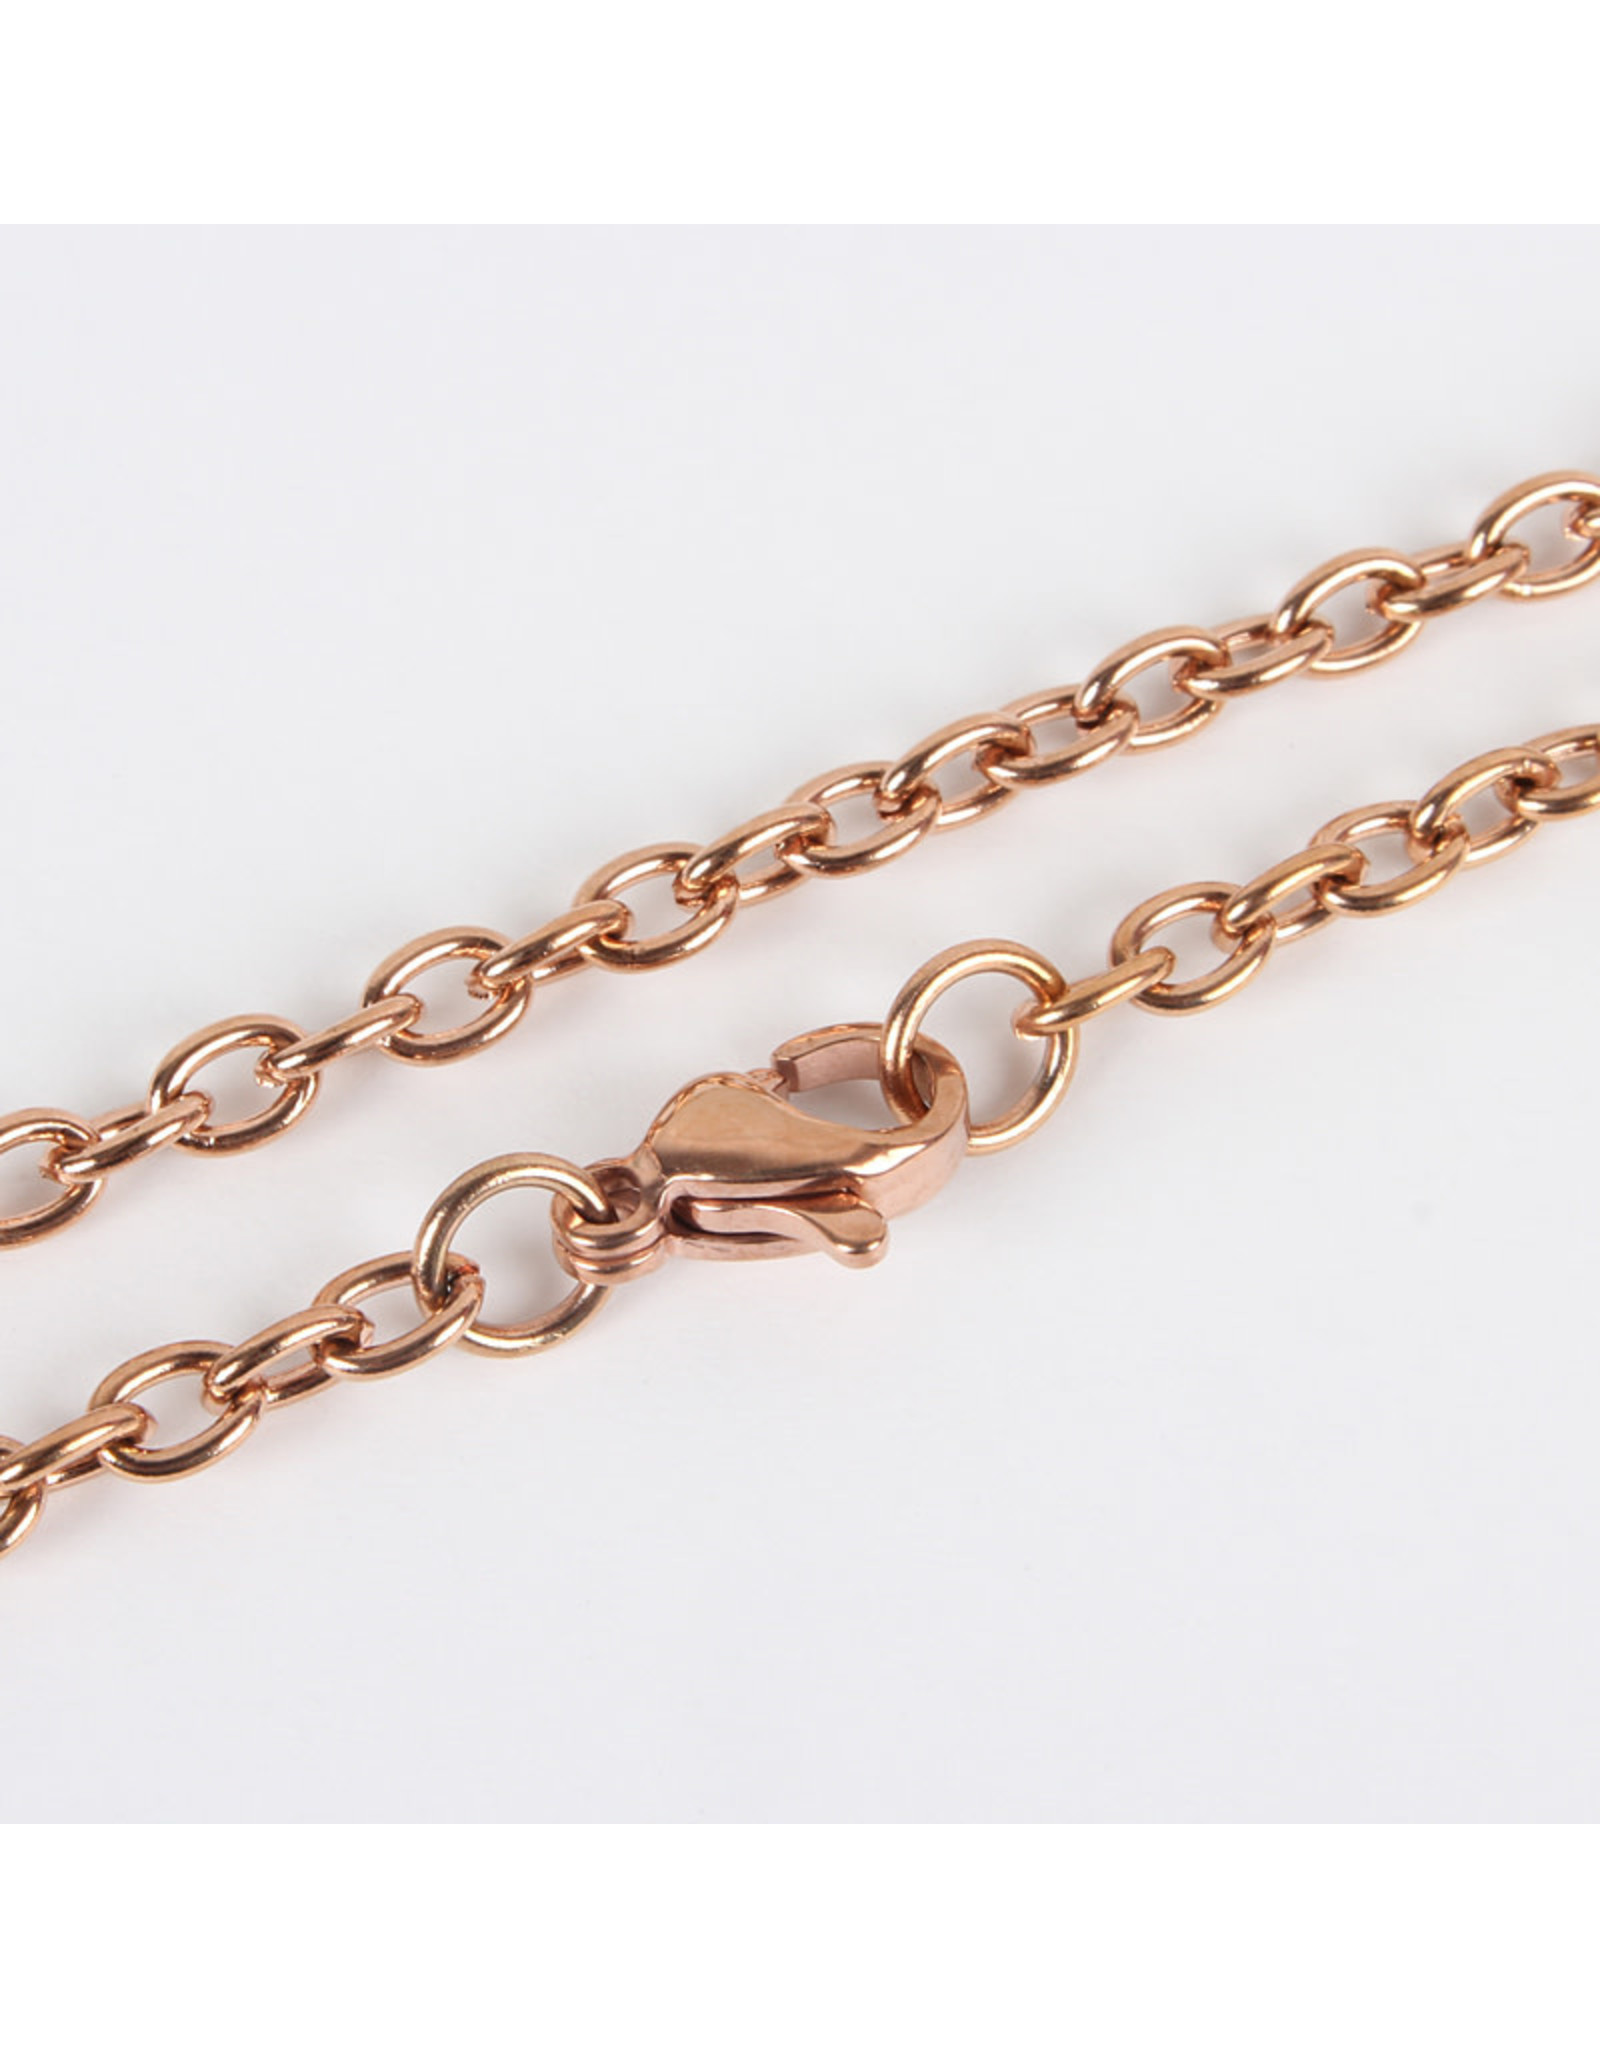 Stainless Steel  Necklace  Rose Gold 5x4mm  23.5'' x1